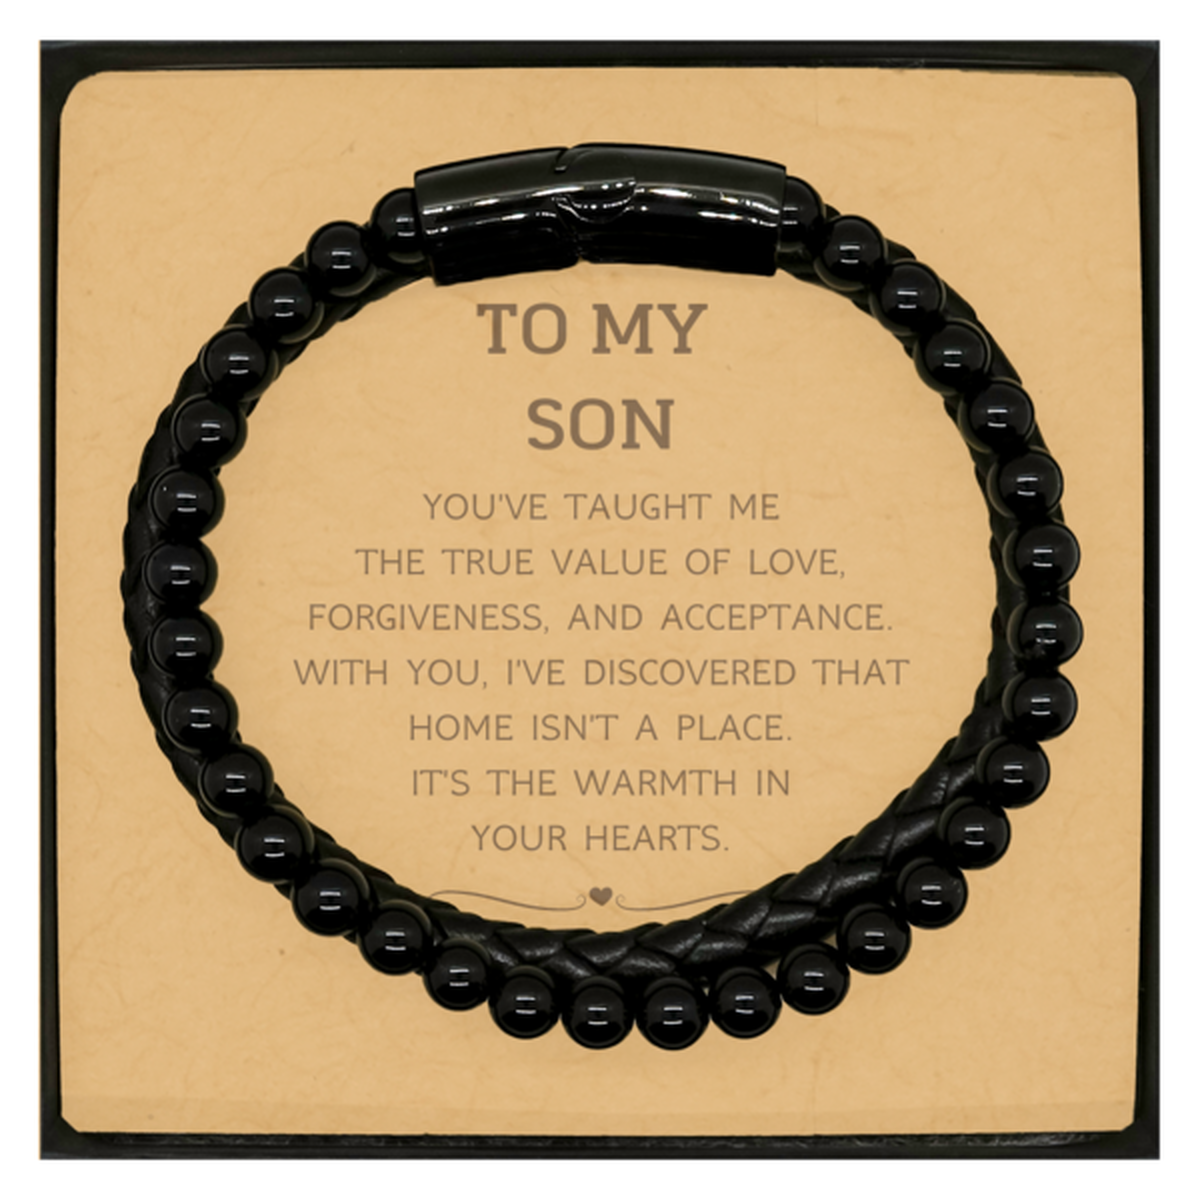 To My Son Gifts, You've taught me the true value of love, Thank You Gifts For Son, Birthday Christmas Stone Leather Bracelets For Son